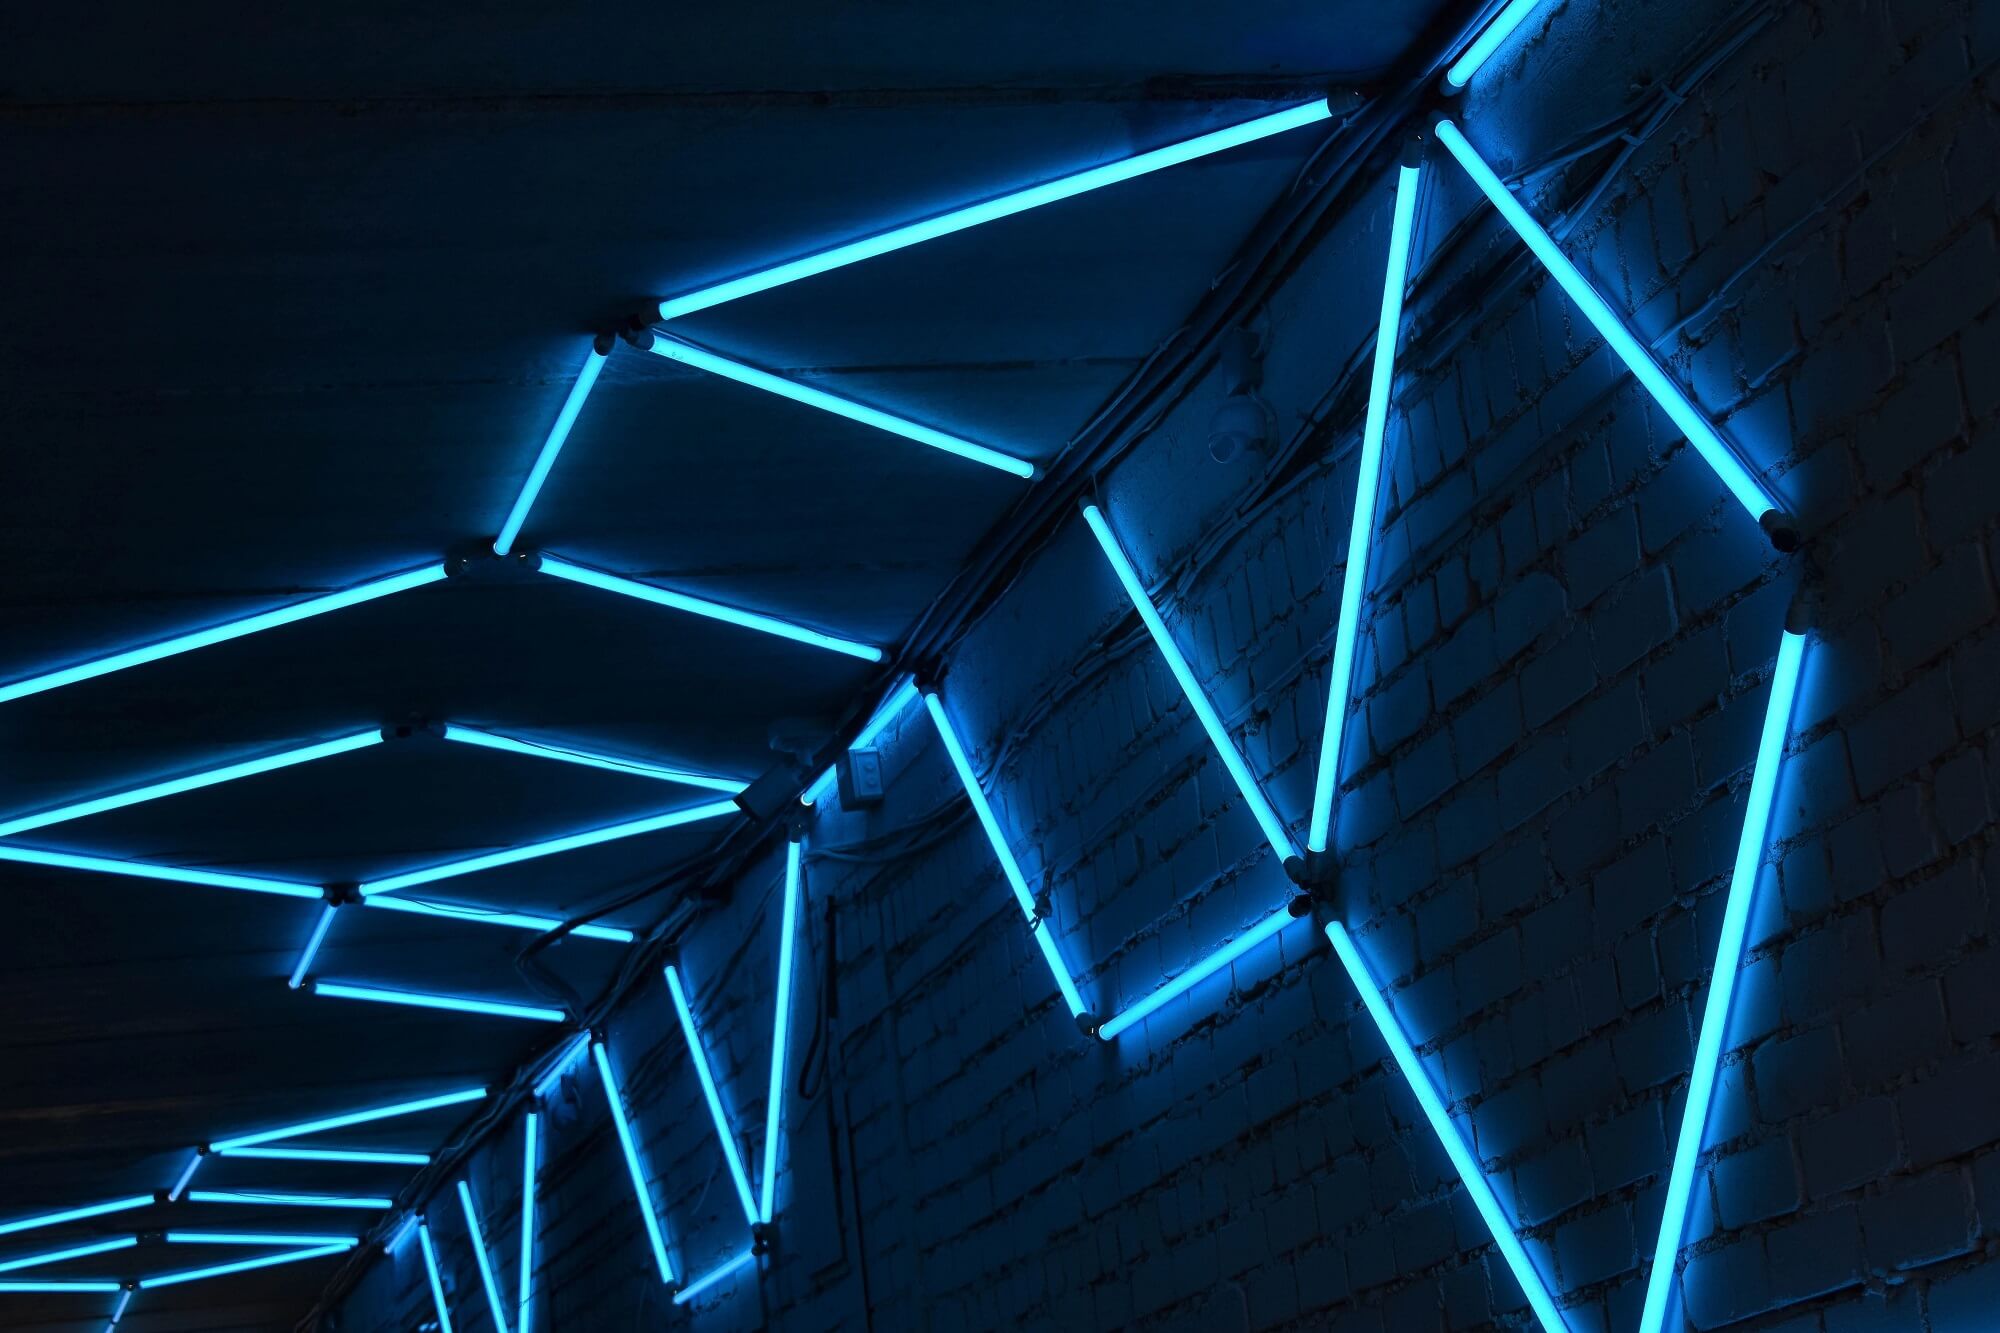 Traditional Neon Lights Vs LED Neon Lights: What’s The Difference?